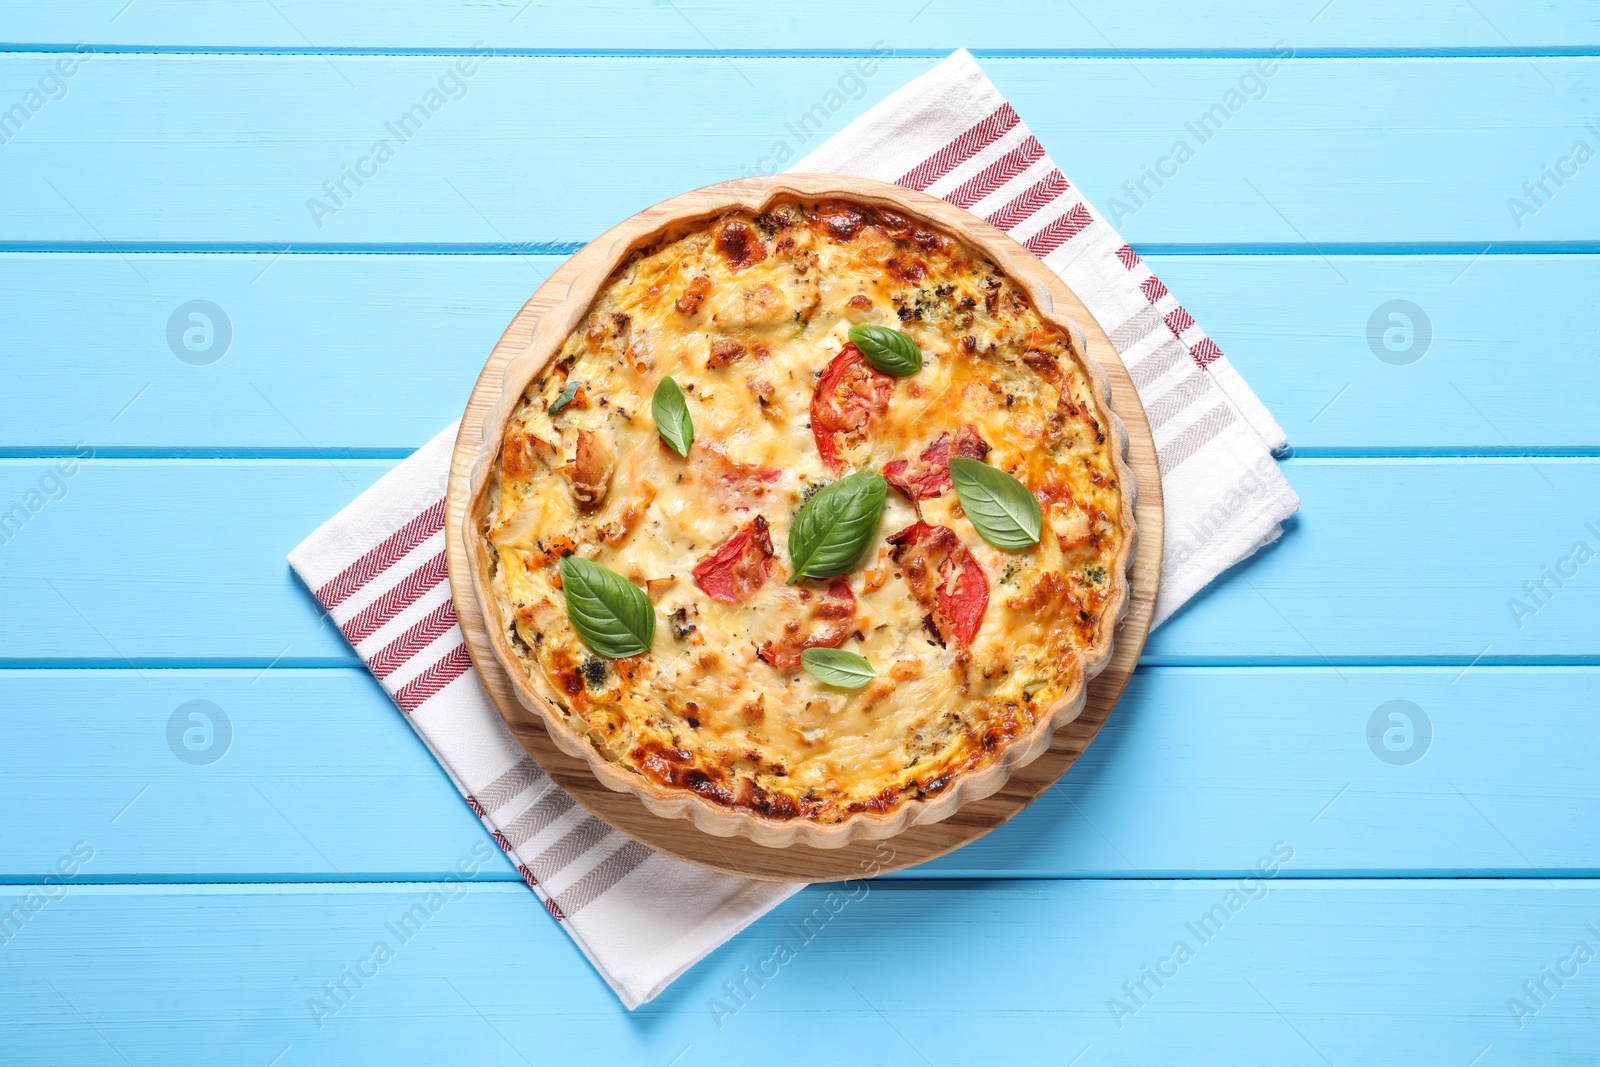 Photo of Tasty quiche with tomatoes, basil and cheese served on light blue wooden table, top view